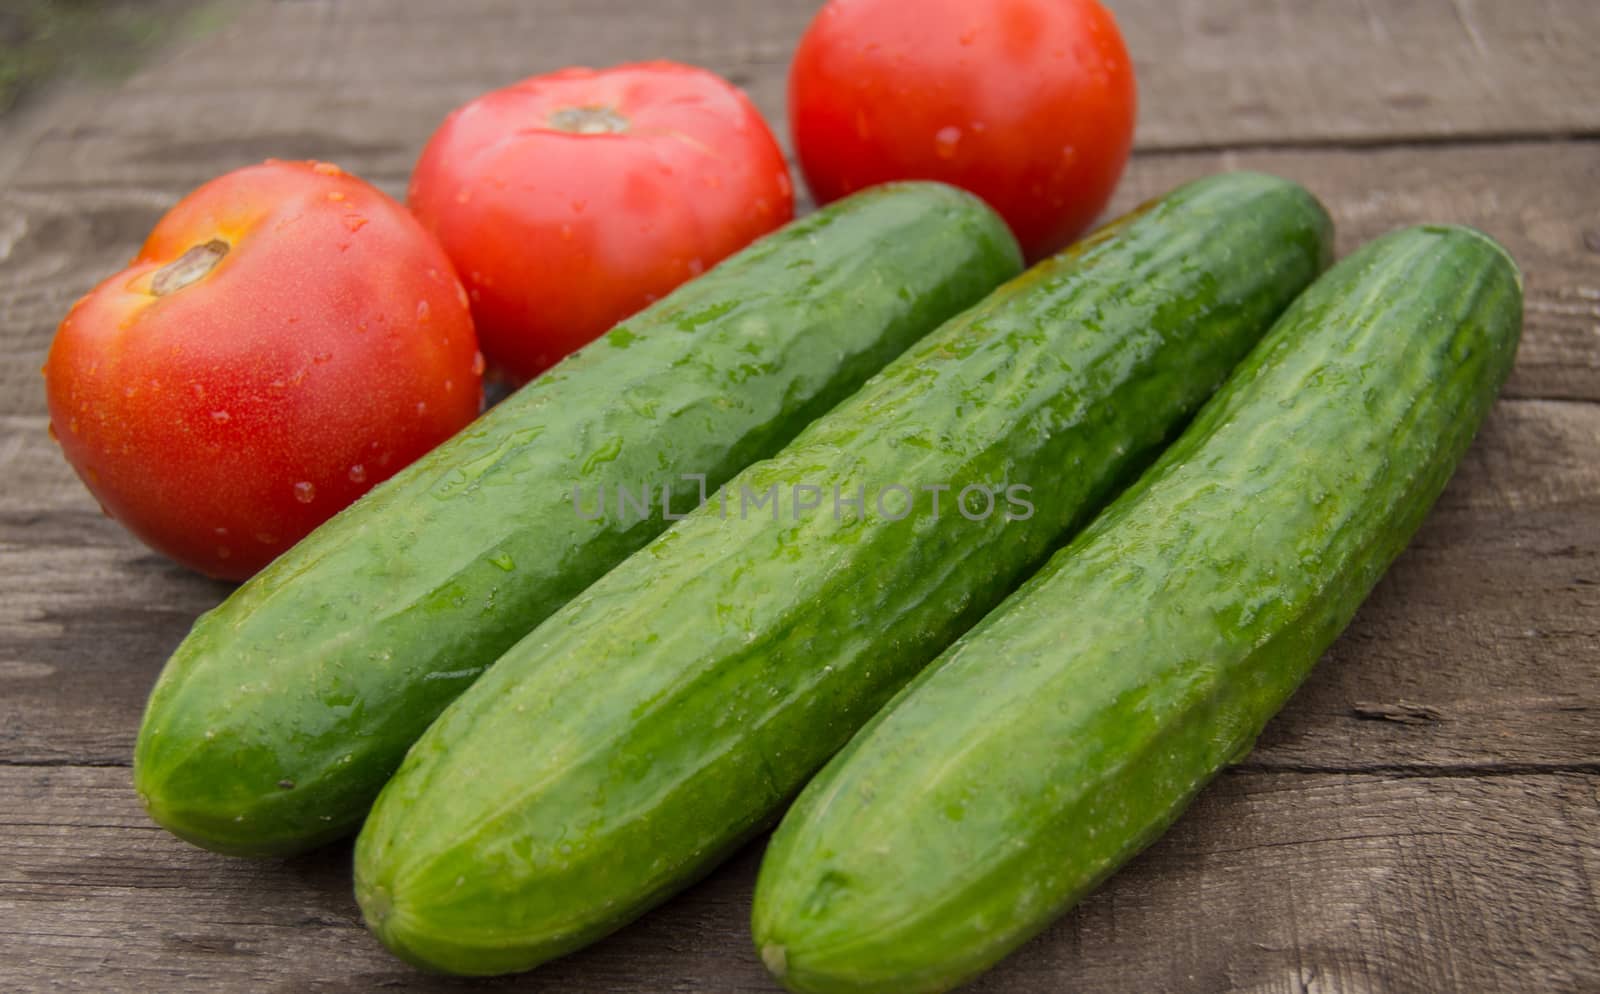 Concept of healthy eating with organic cucumber tomatoes, wooden background.